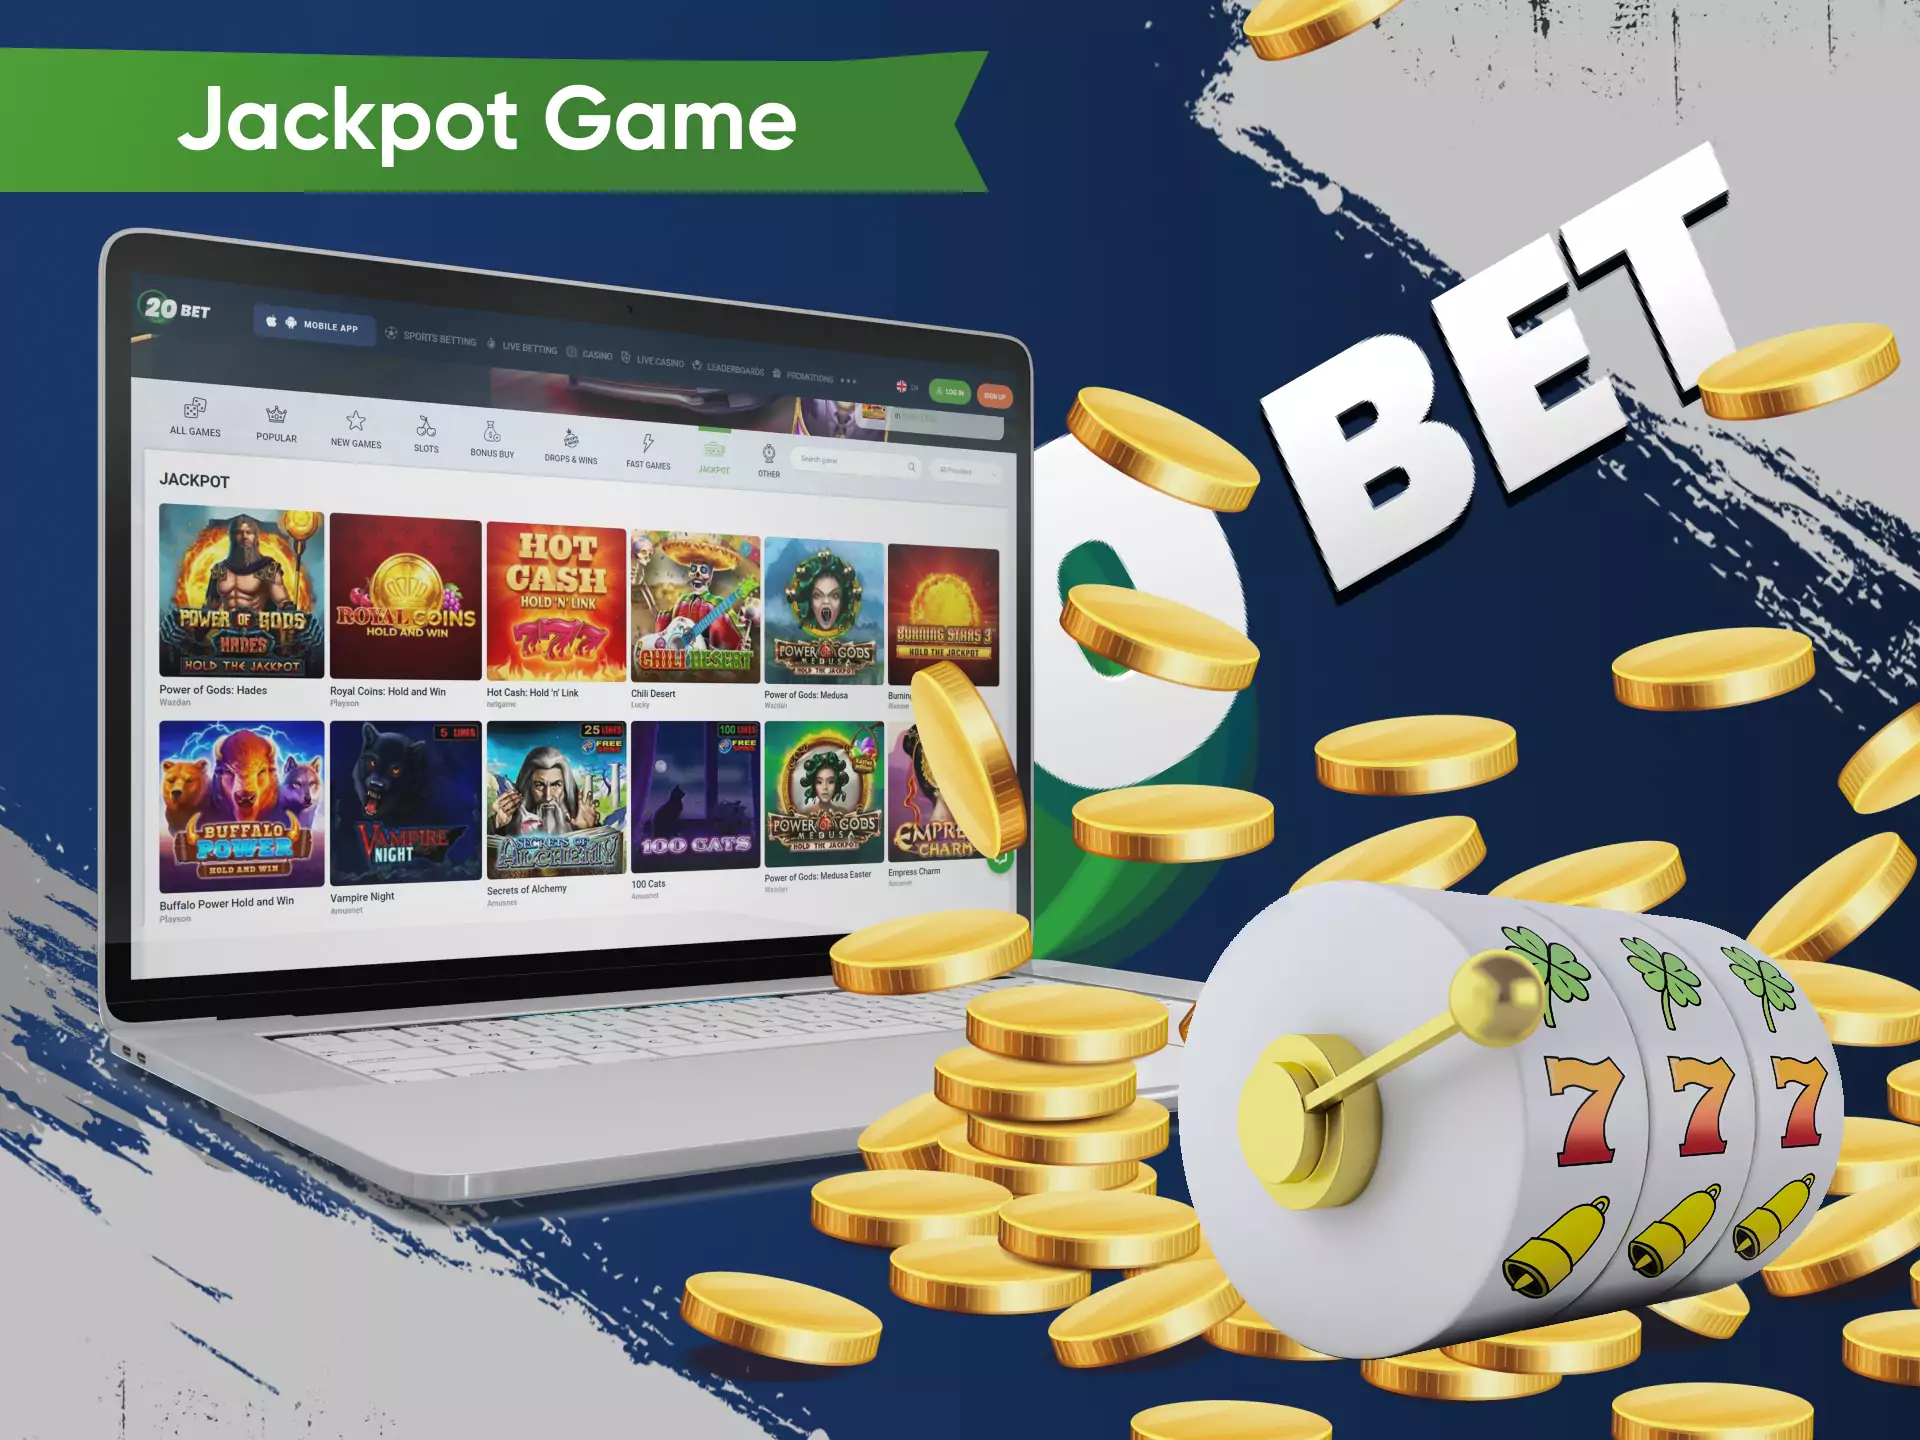 Go to the 20bet casino to win a jackpot in an online game.